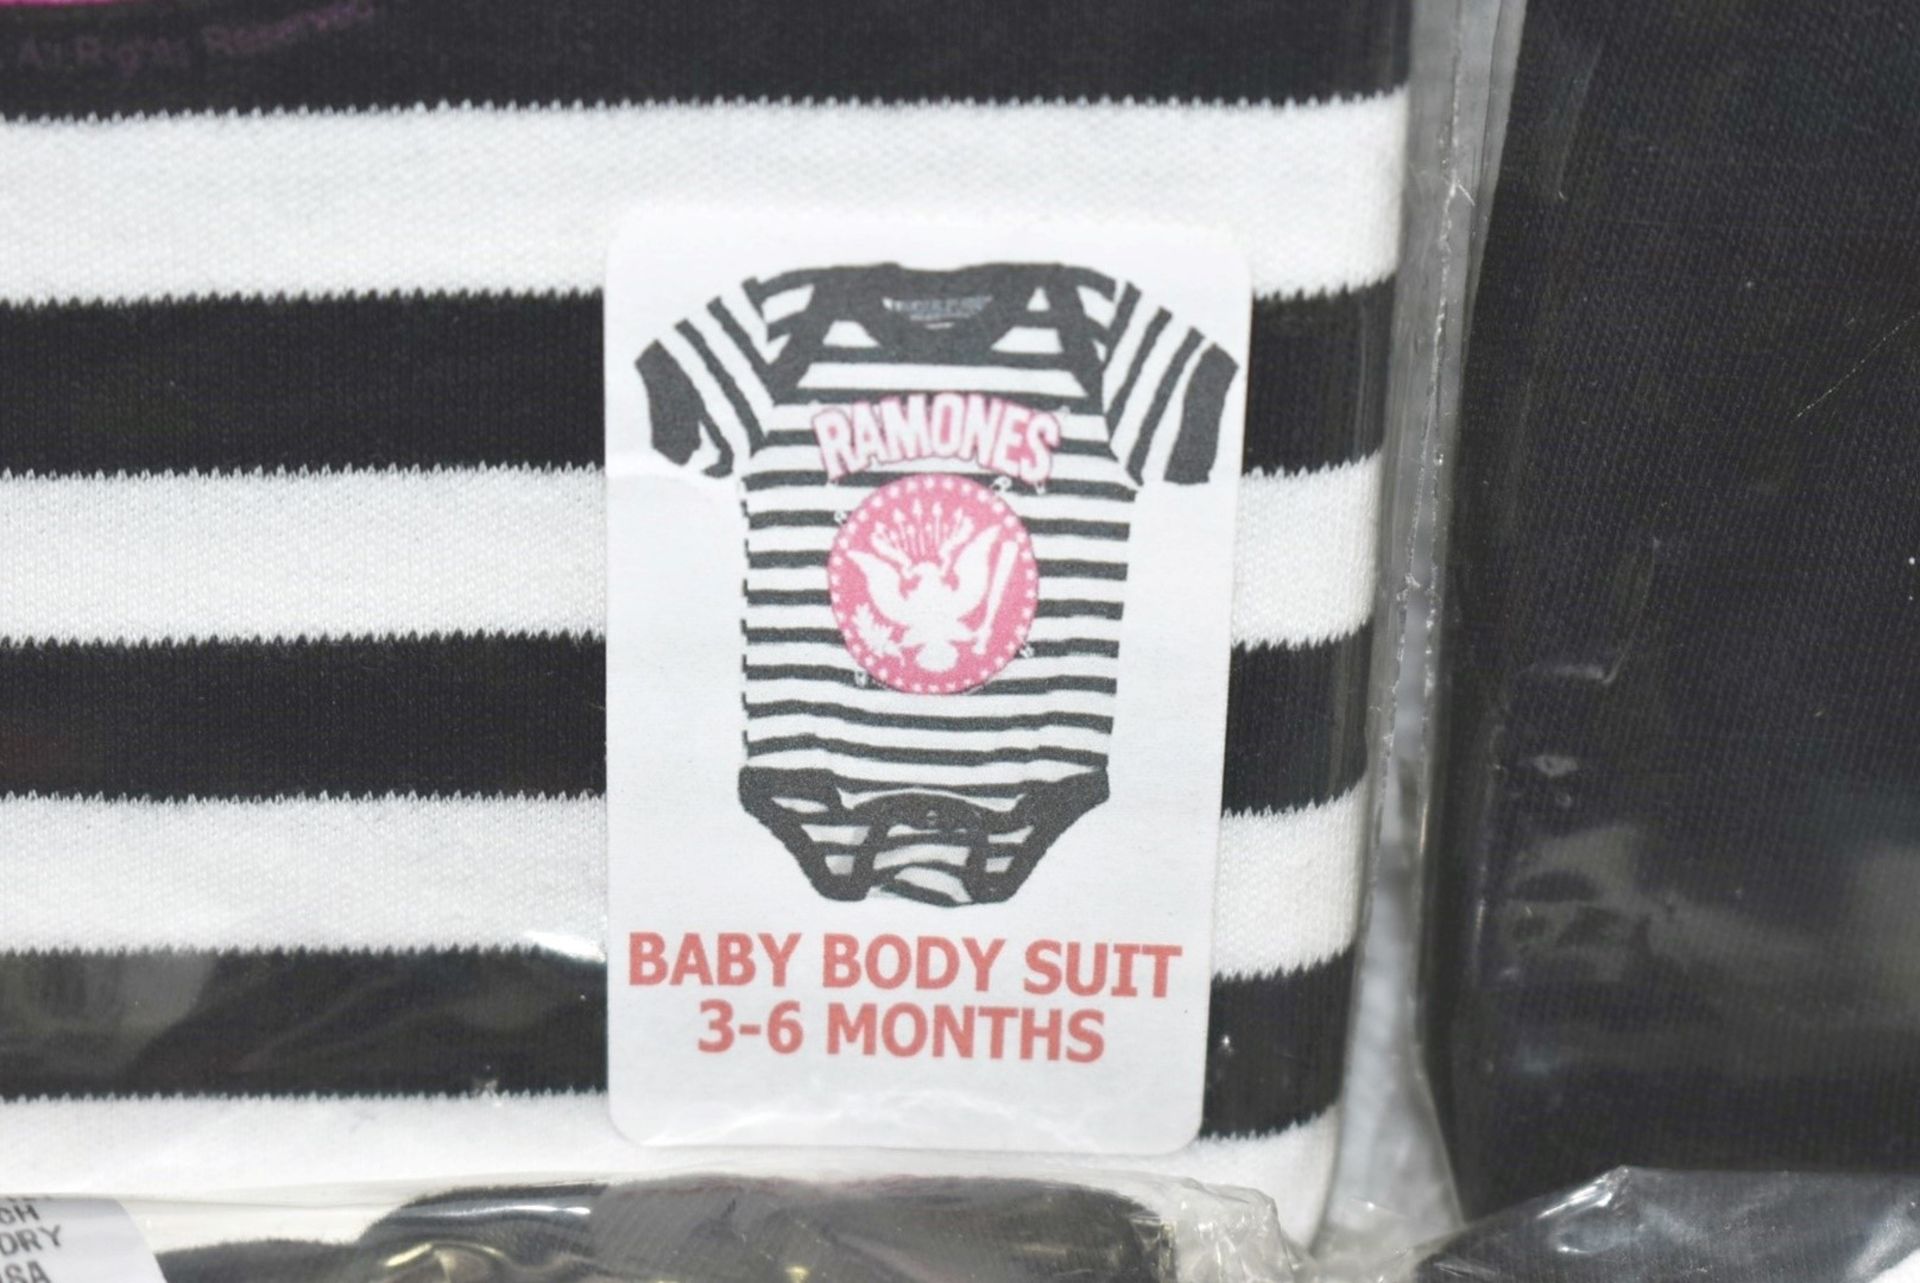 4 x Assorted Baby Body Suits - Features Johnny Cash and the Ramones - Size: 3 to 6 Months - - Image 5 of 8